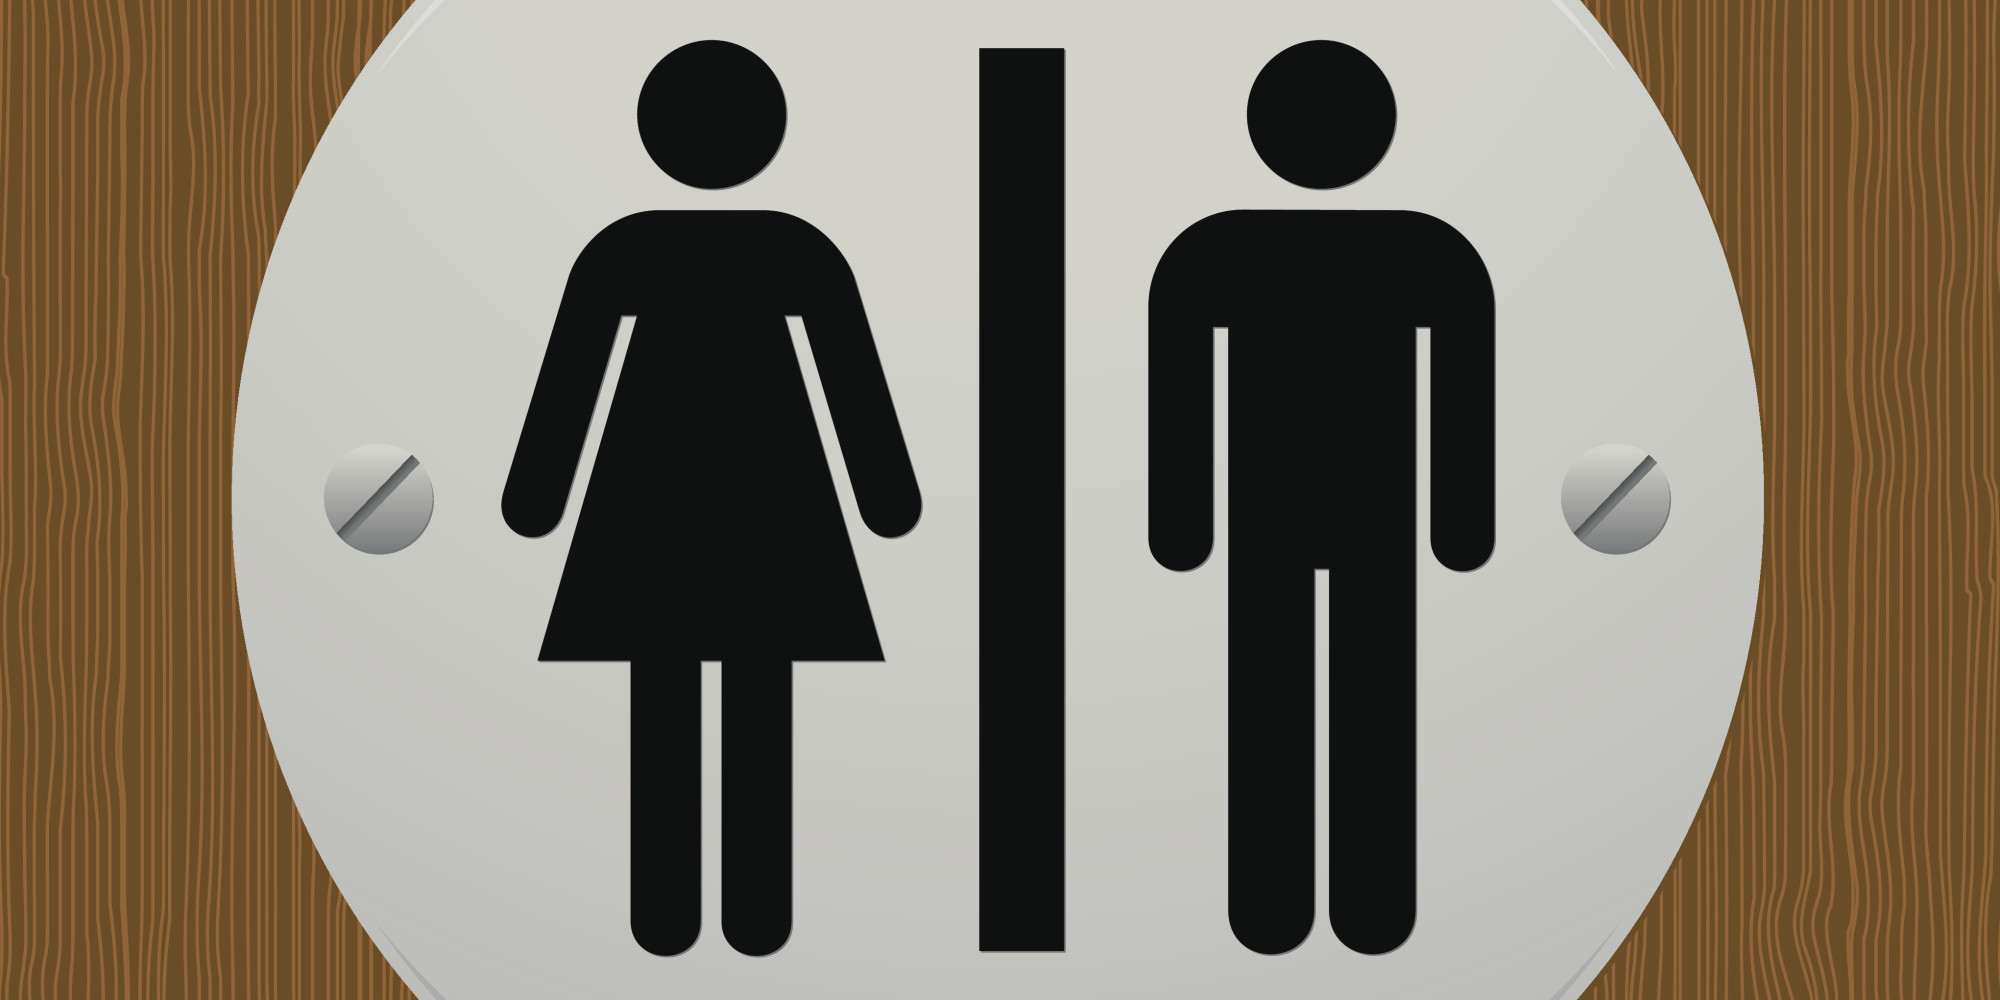 Why Are Bathrooms Segregated By Sex In The First Place